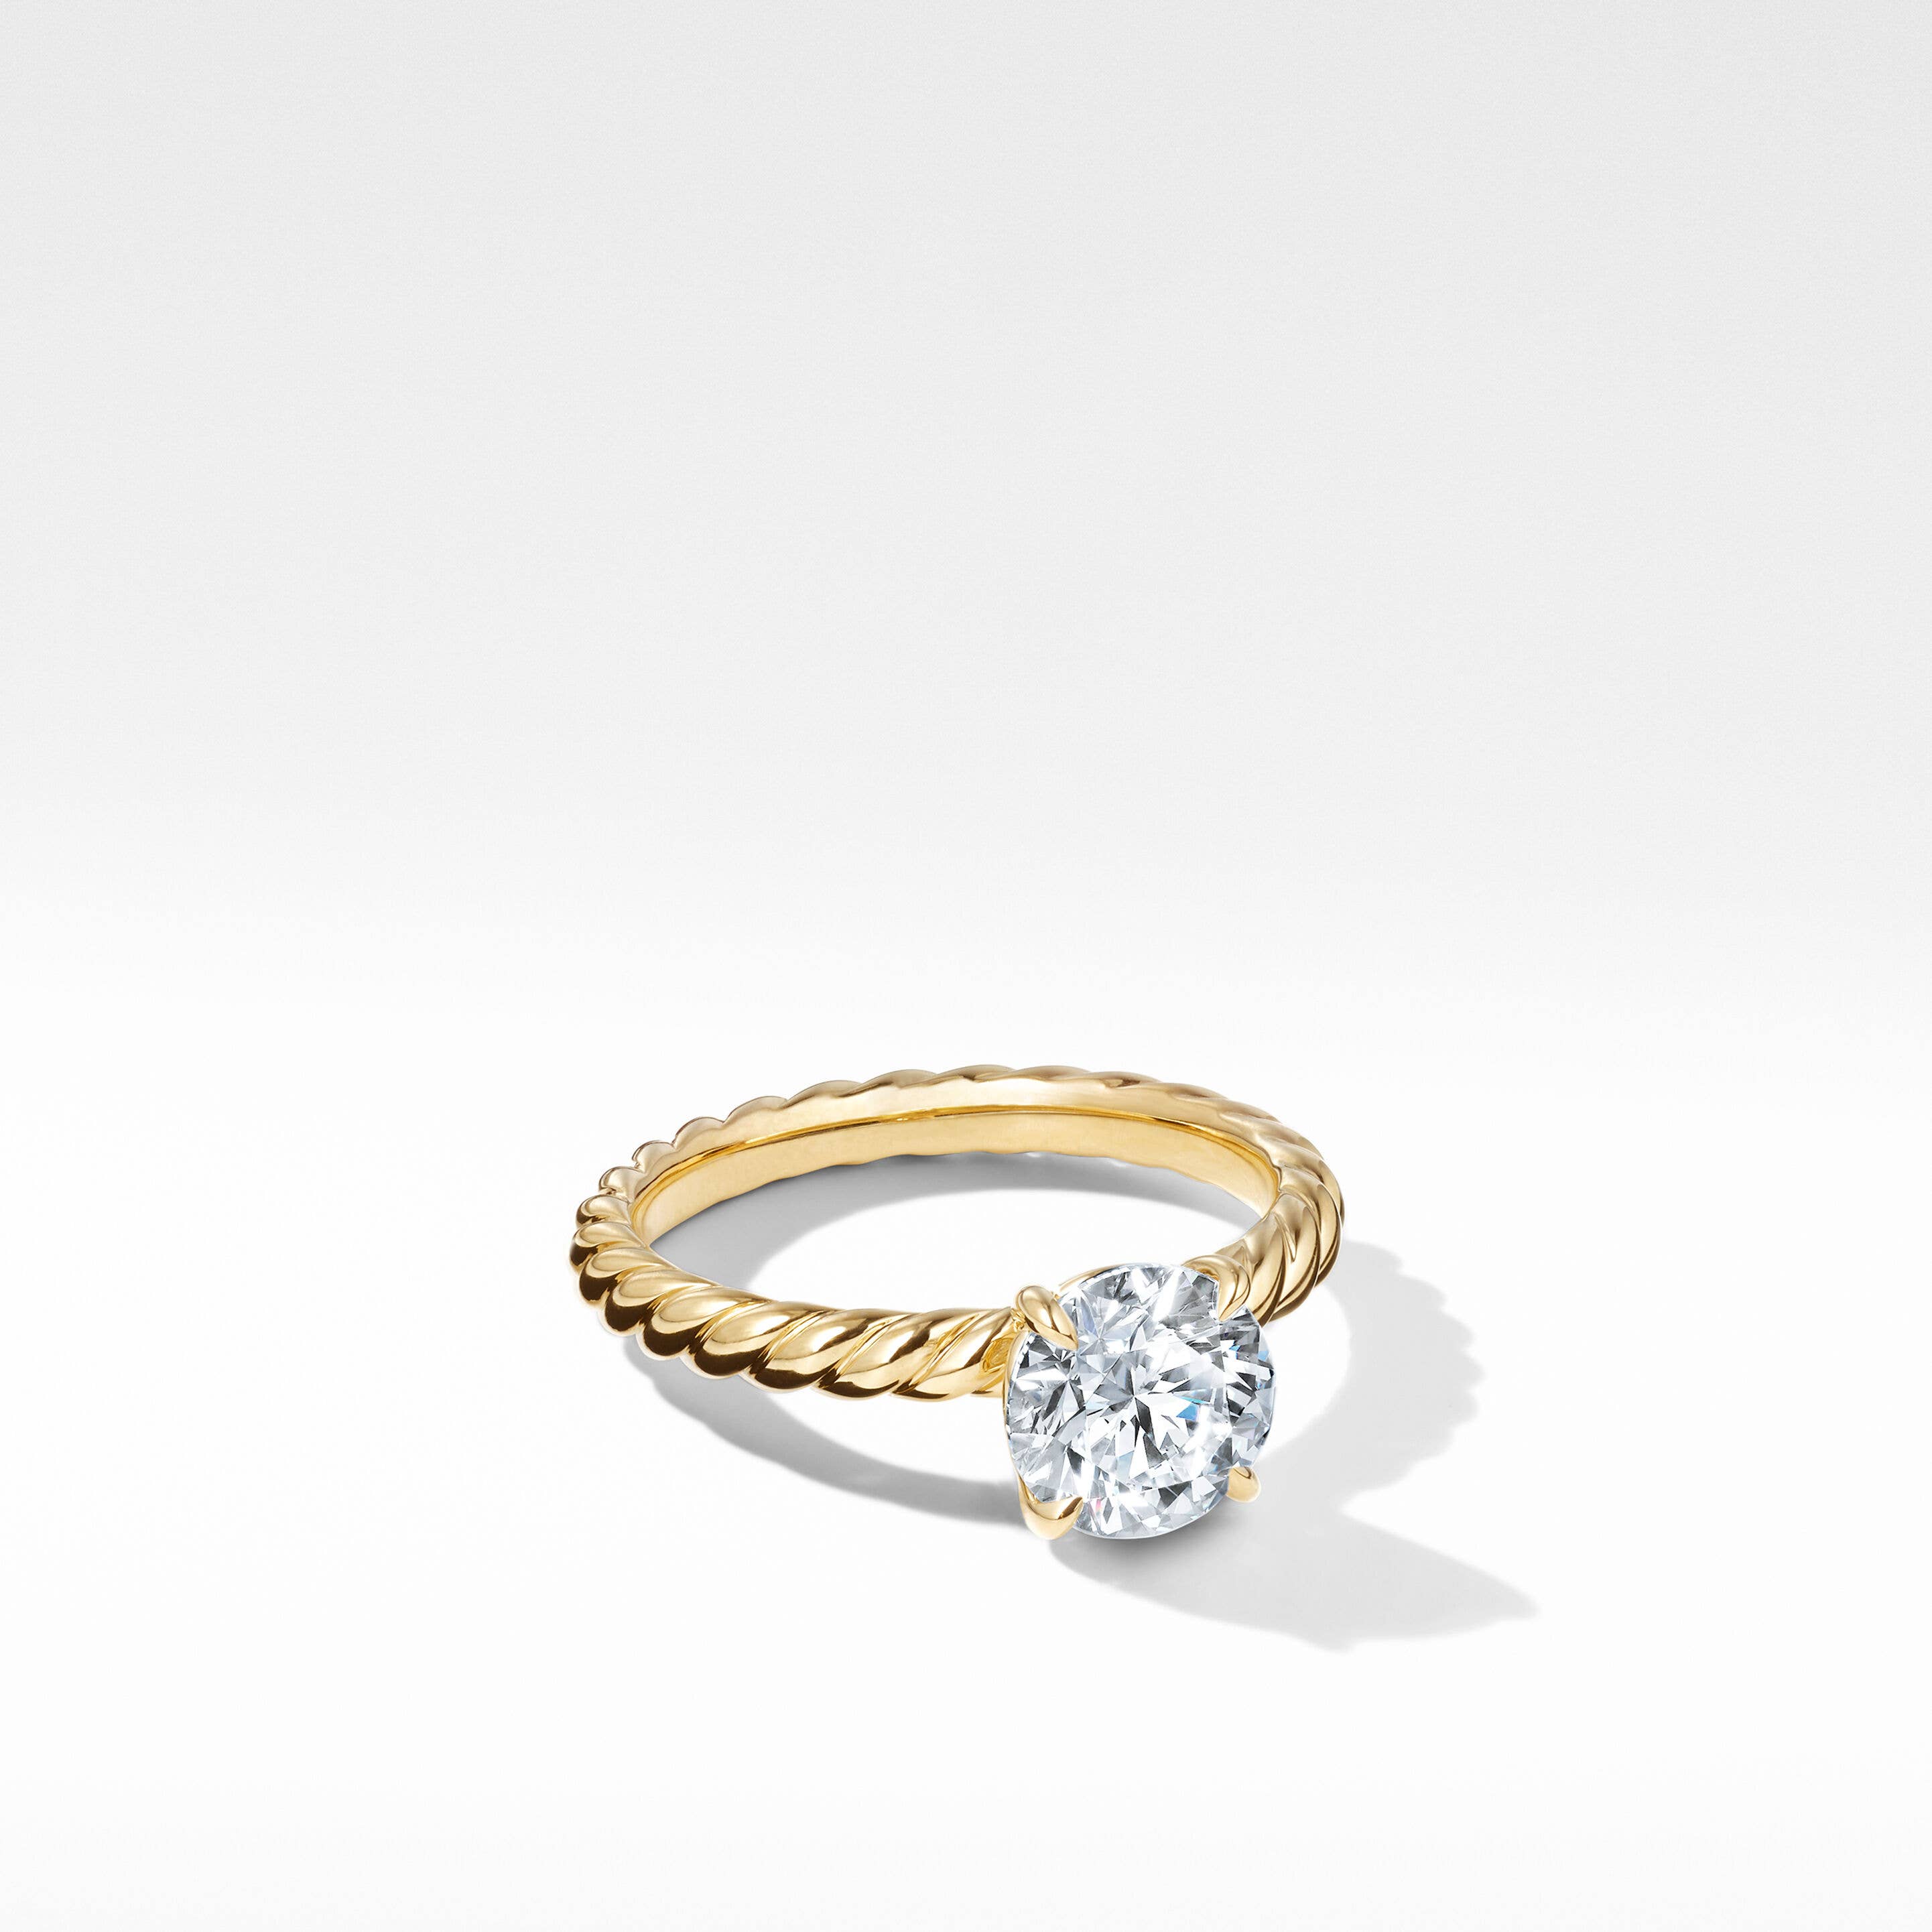 DY Unity Cable Solitaire Engagement Ring in 18K Yellow Gold, Round